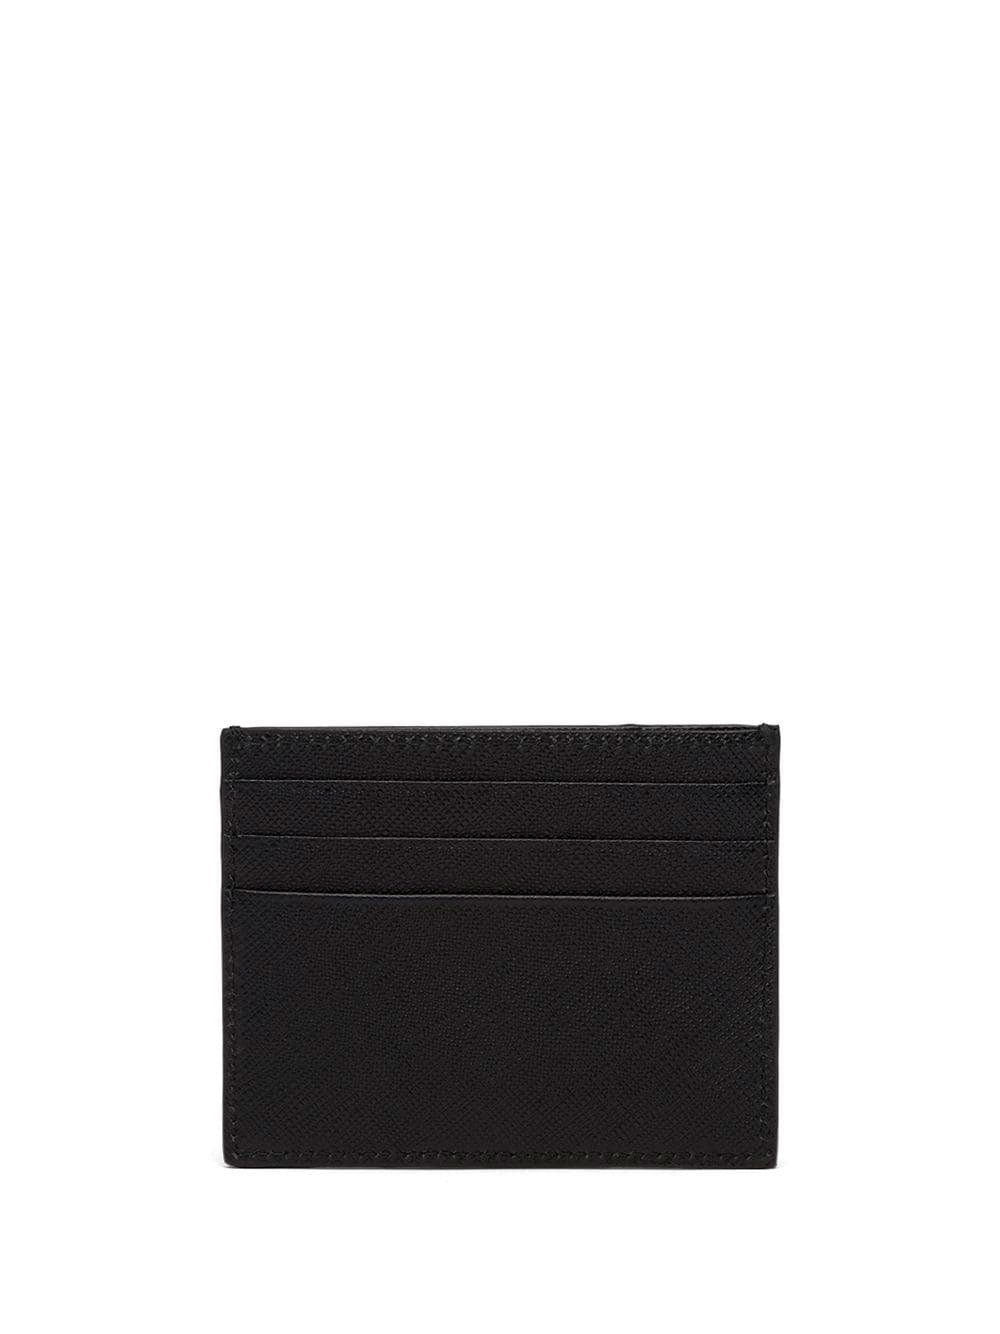 Compact cardholder